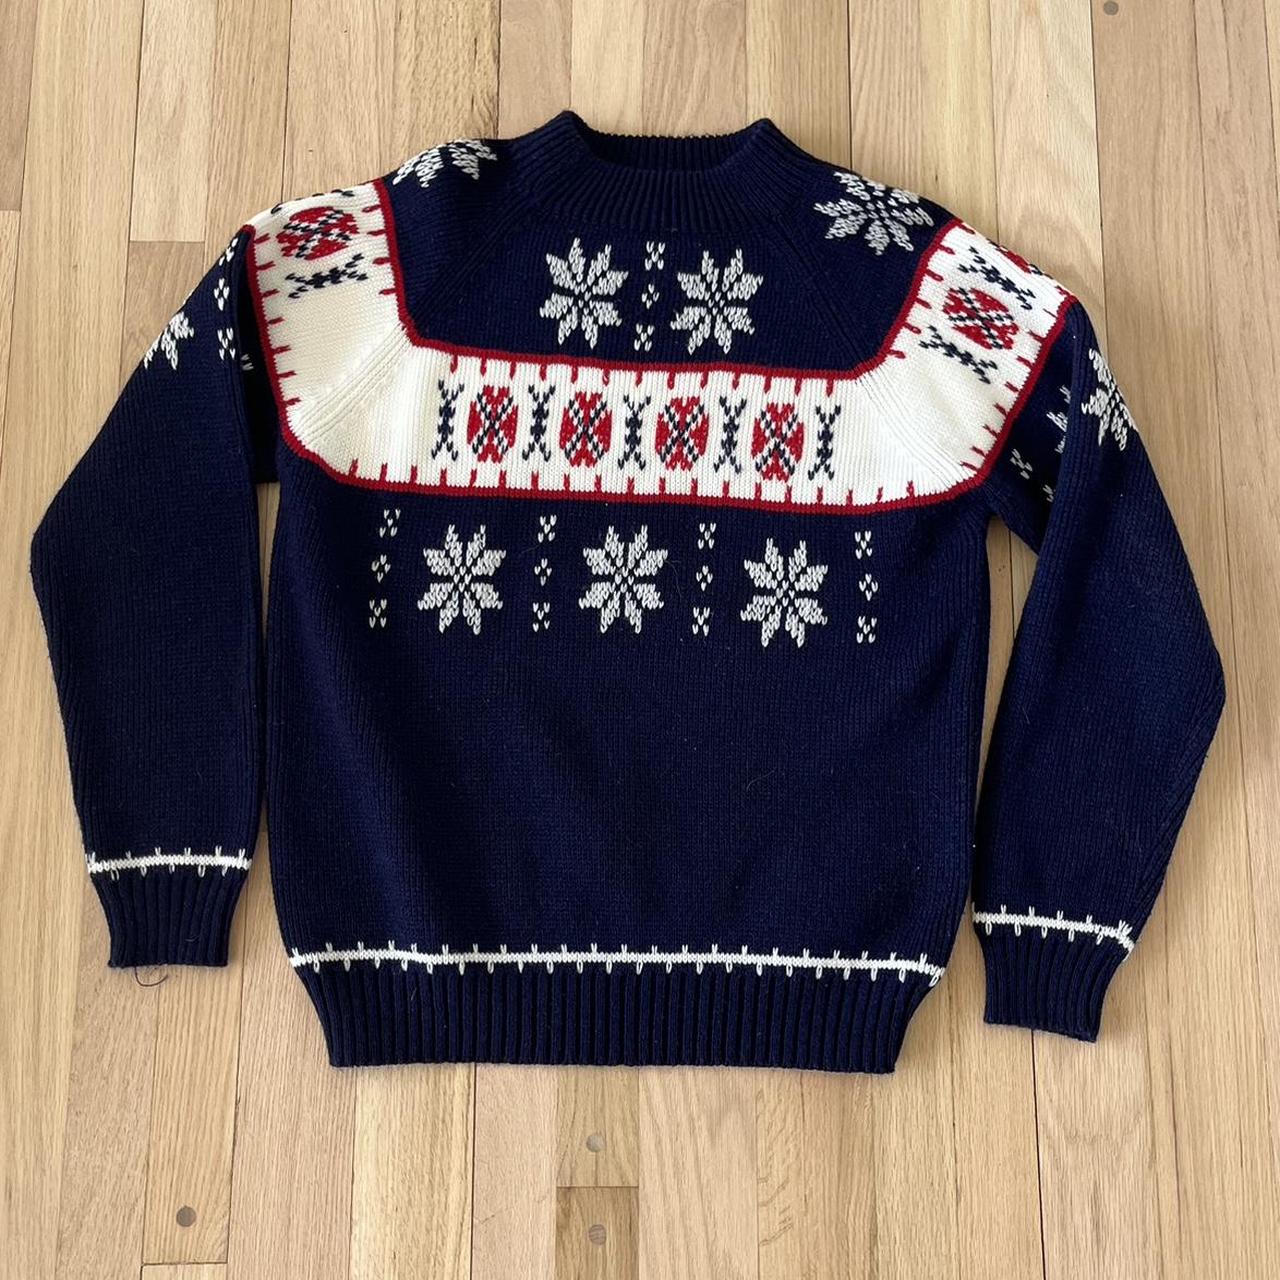 JCPenney Men's Navy and Red Jumper | Depop